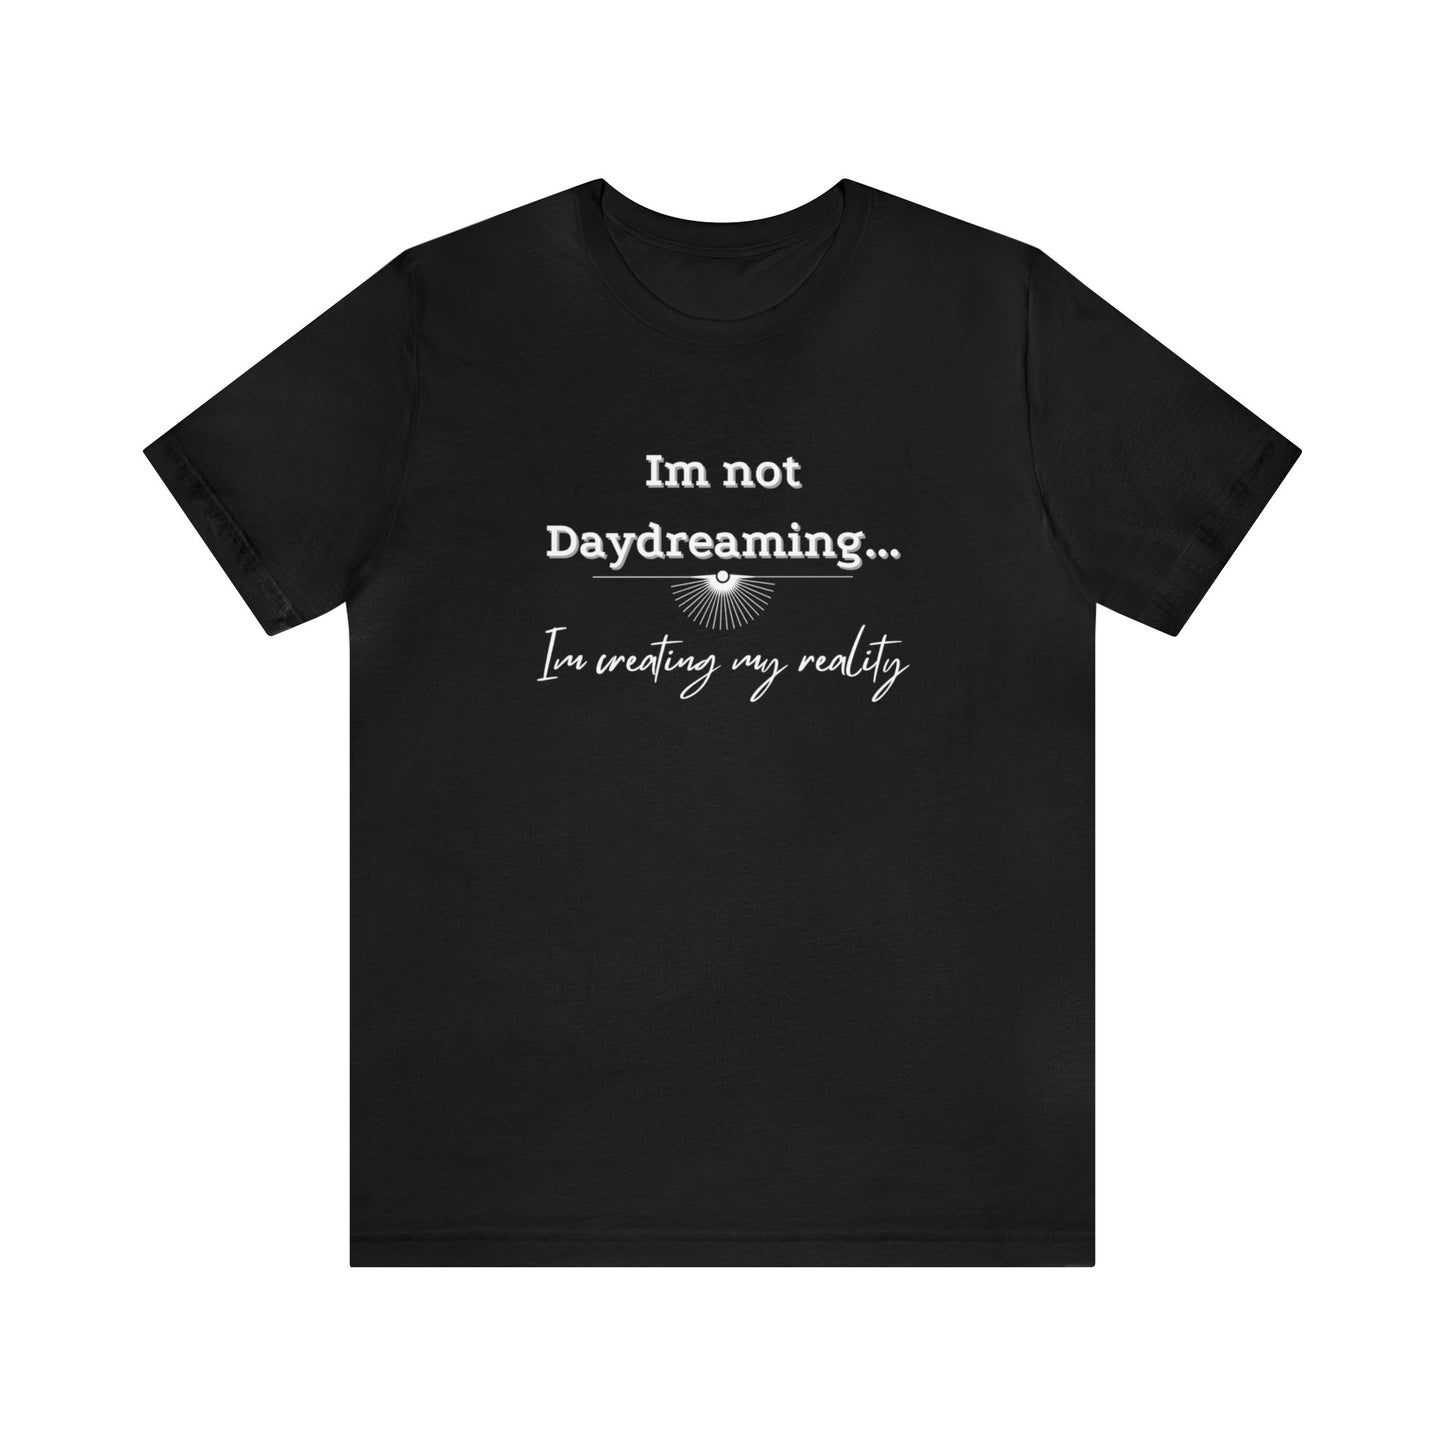 I'm not daydreaming I'm creating my reality! Inspirational jersey t shirt.